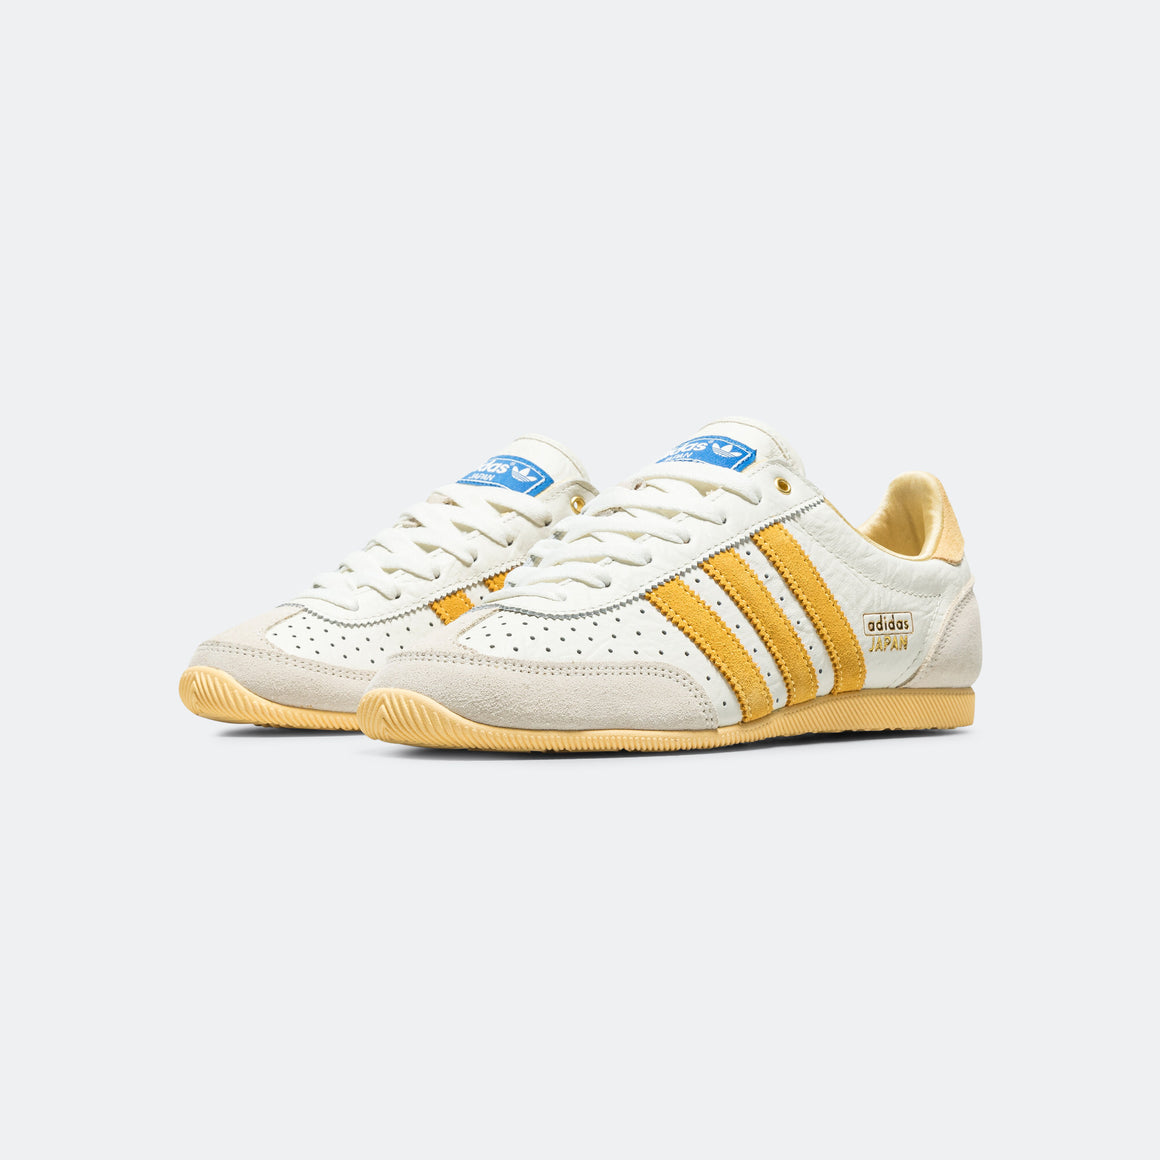 adidas - Womens Japan - Off White/Spark-Orange Tint - UP THERE